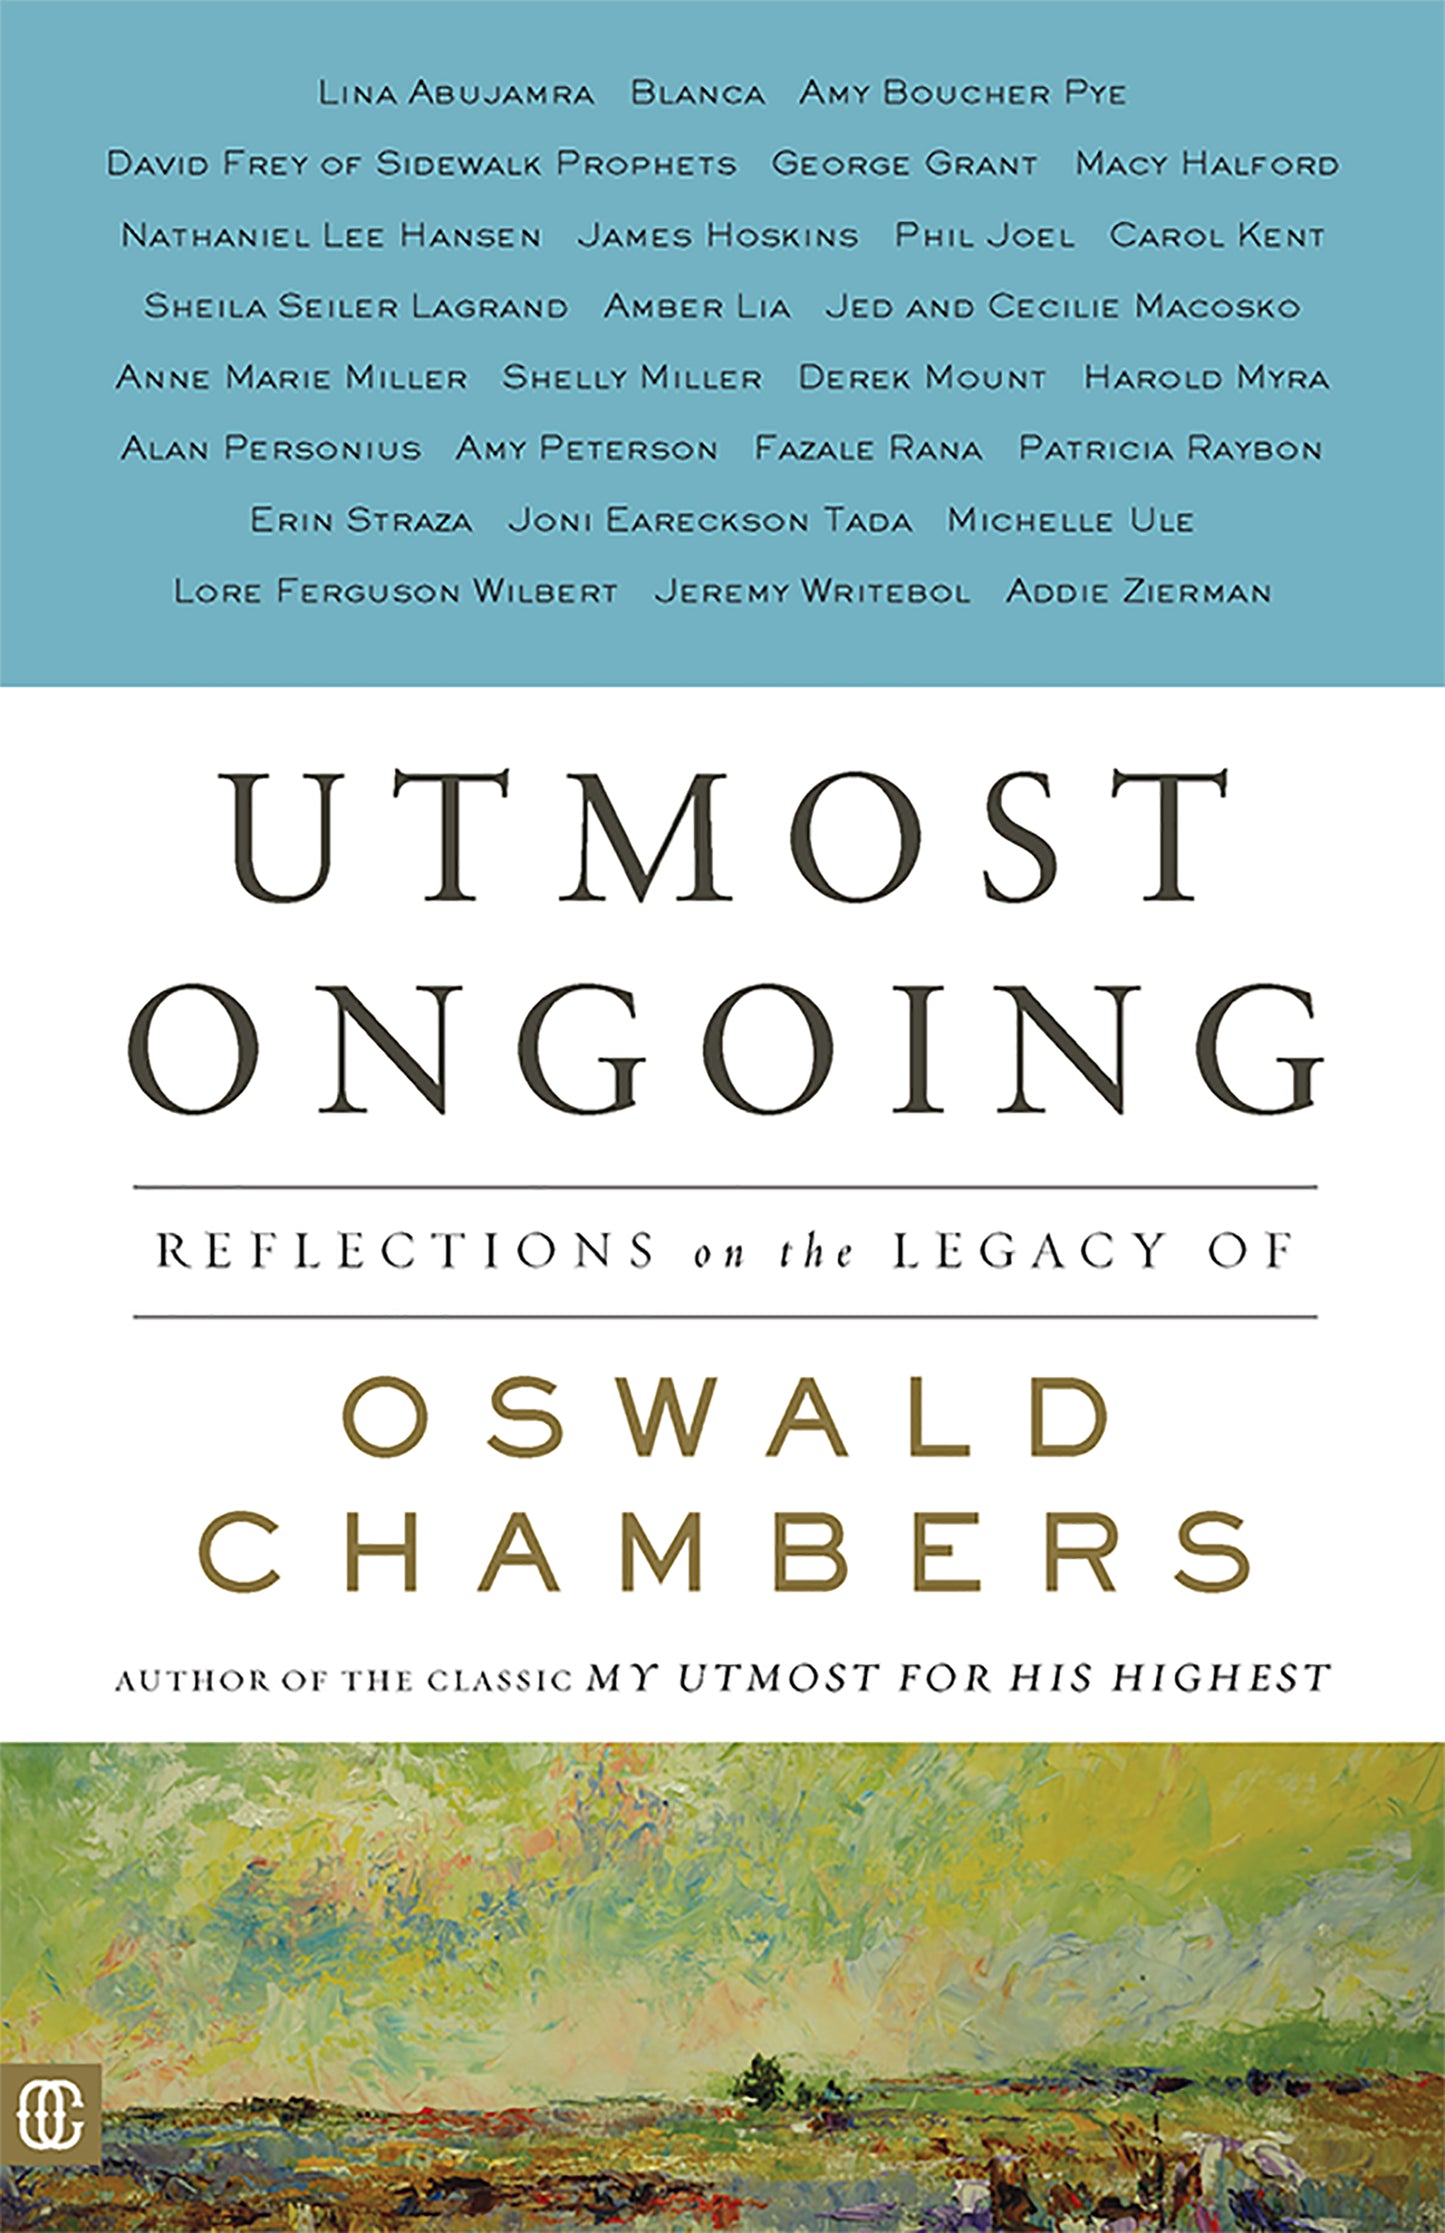 Utmost Ongoing [E-book]